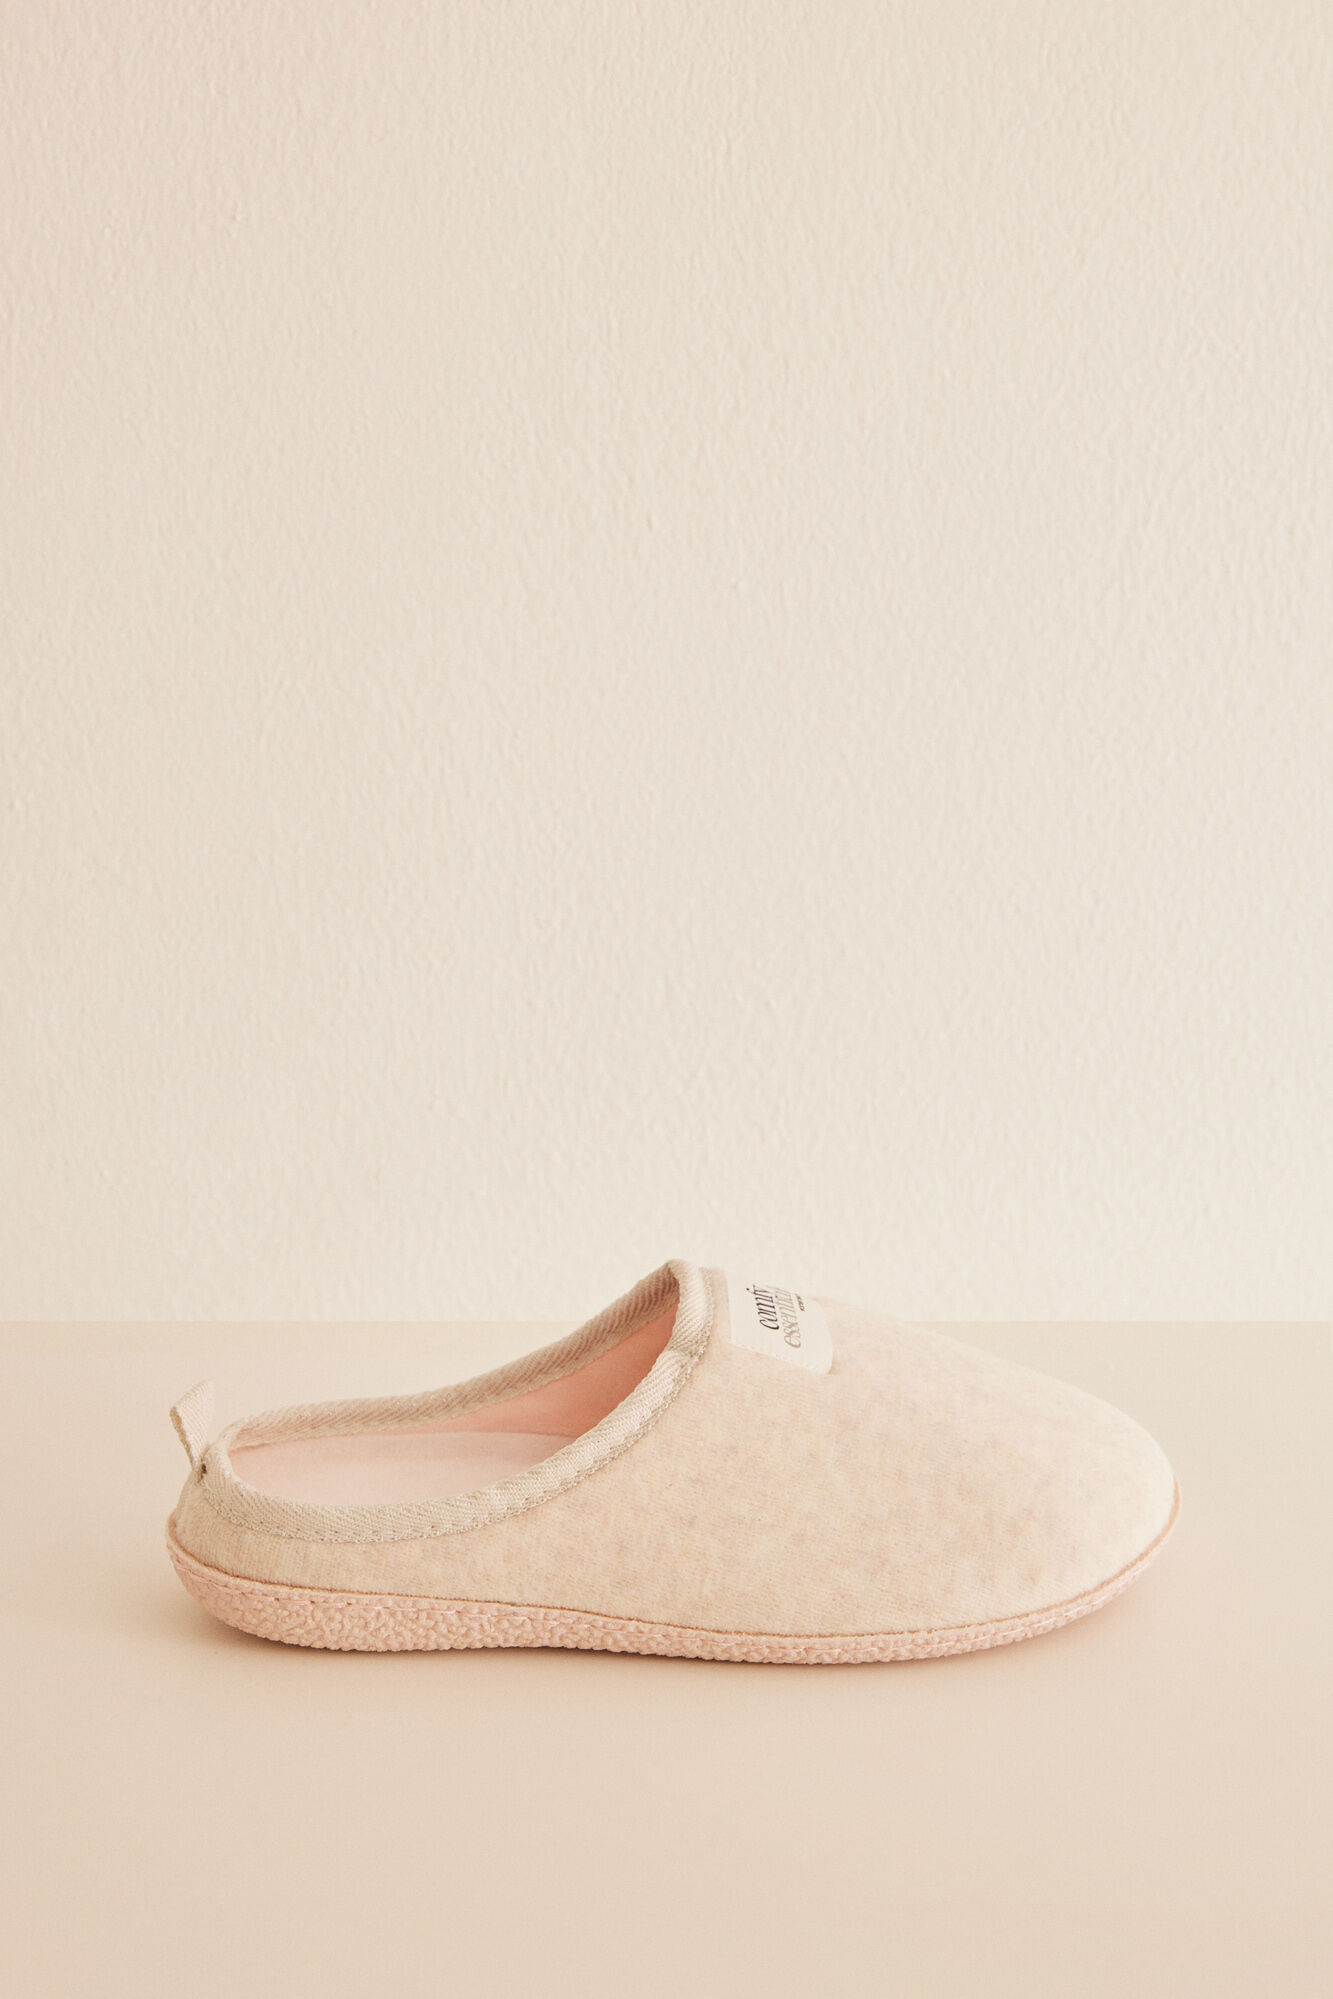 Beige slippers with removable insoles | Women's footwear | WomenSecret